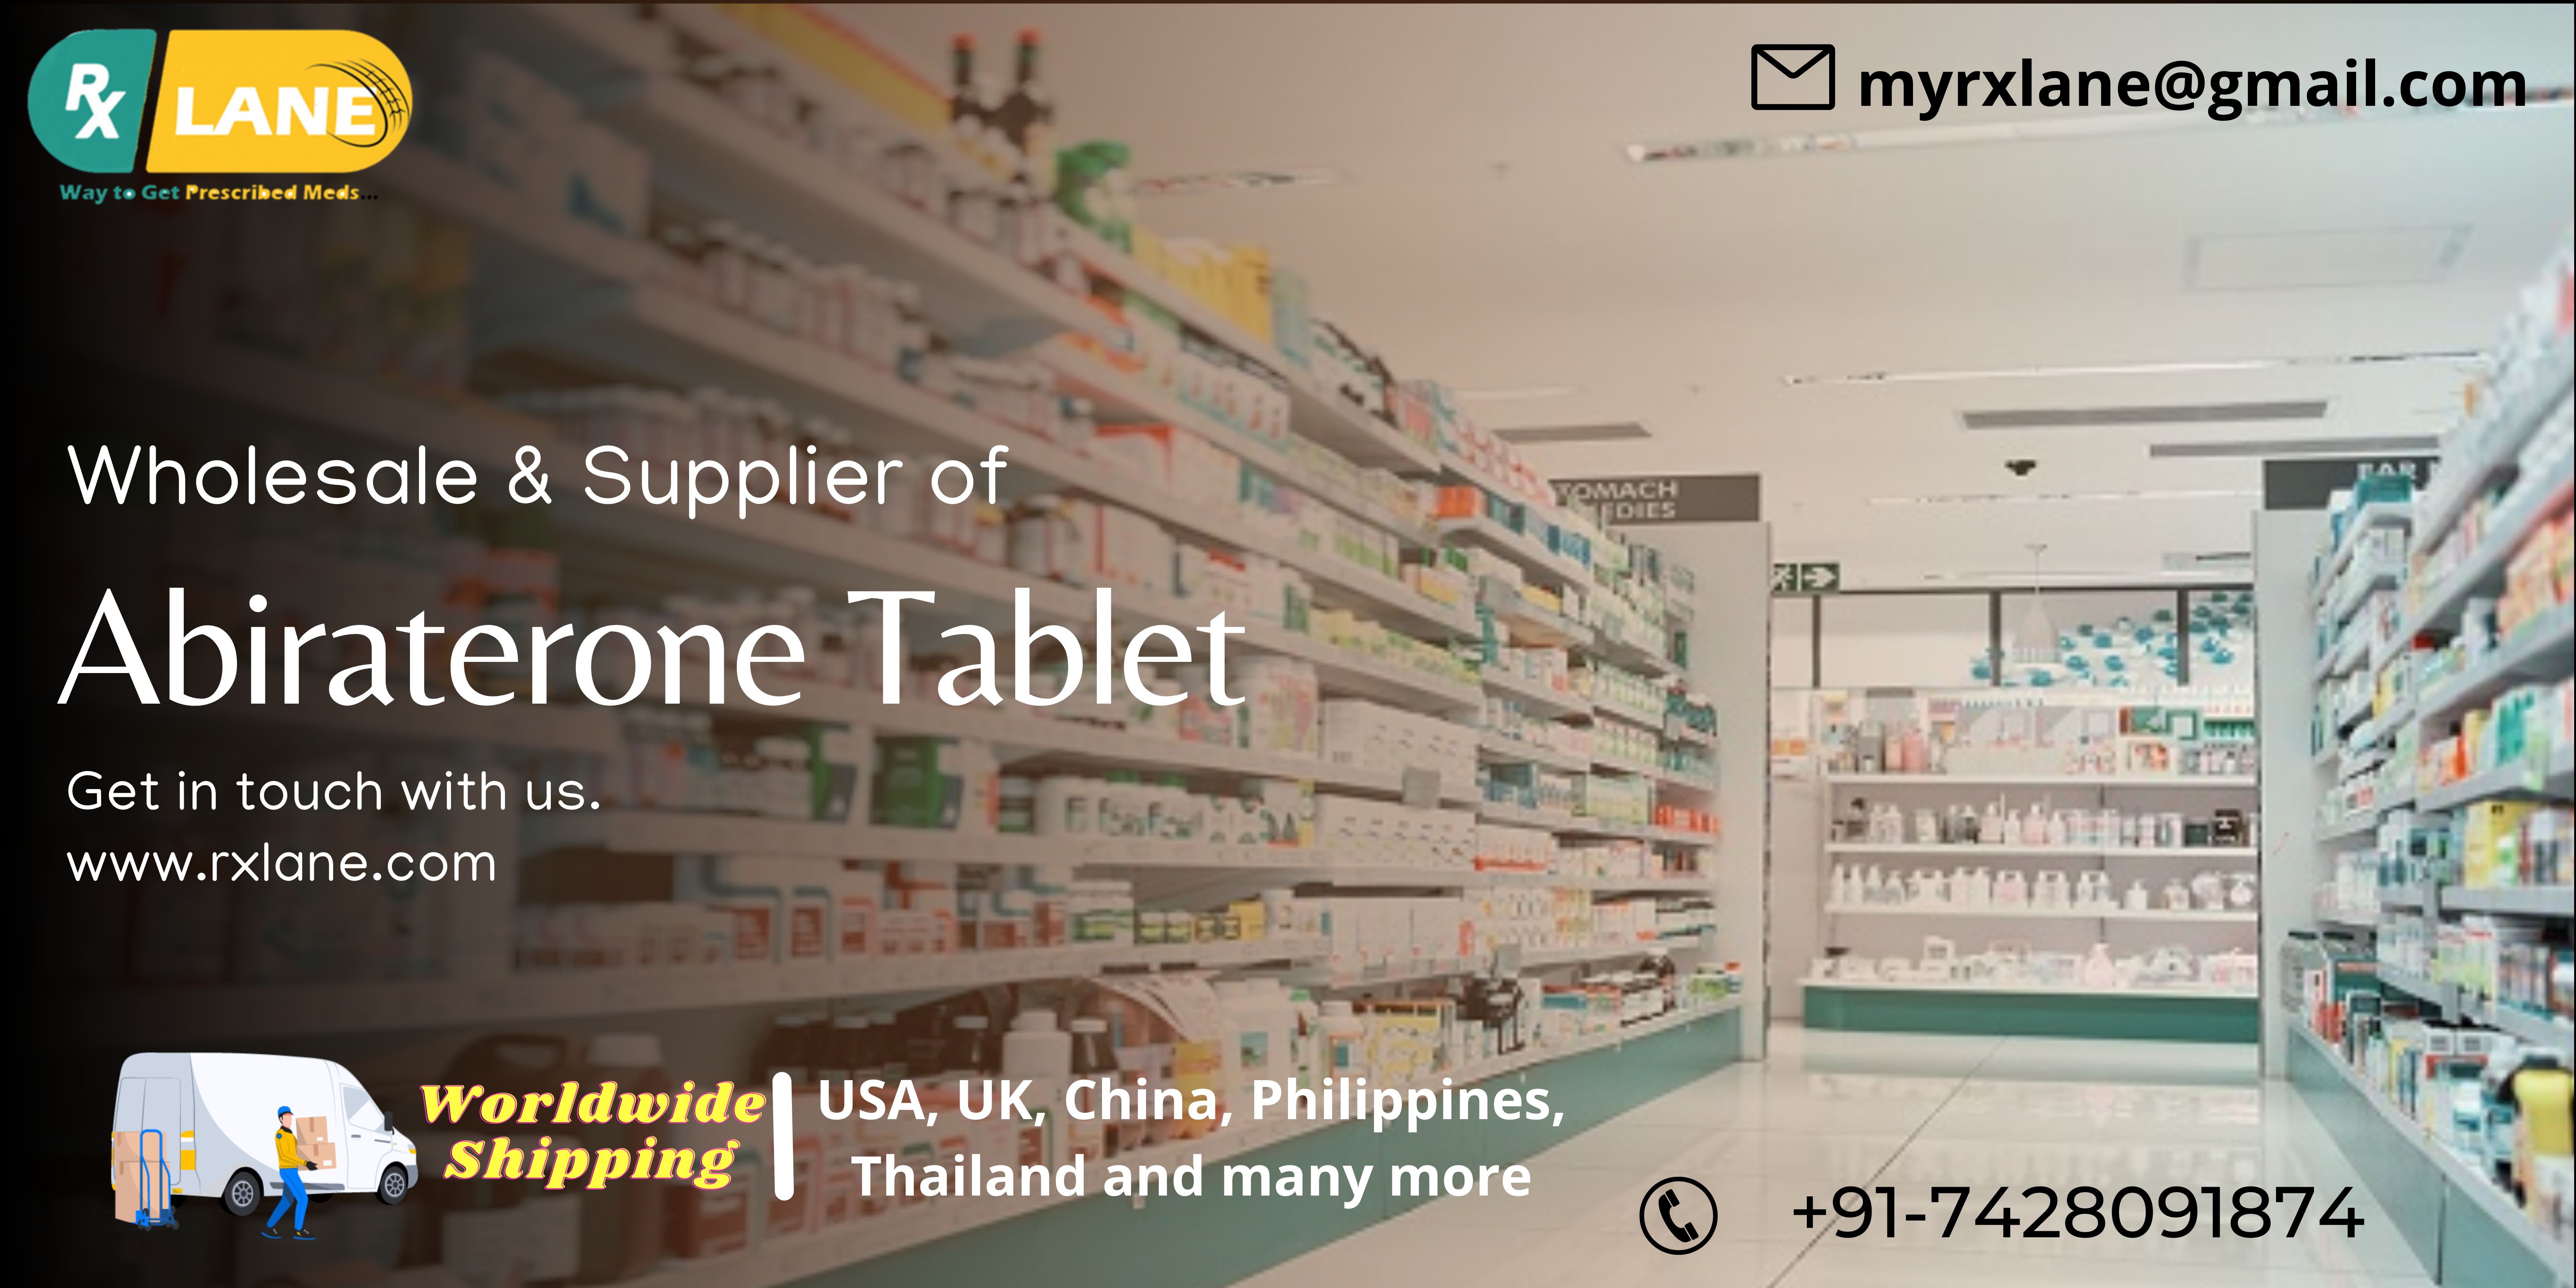 Generic Abiraterone Tablet Wholesale Price Online USA UK Thailand Philippines รูปที่ 1